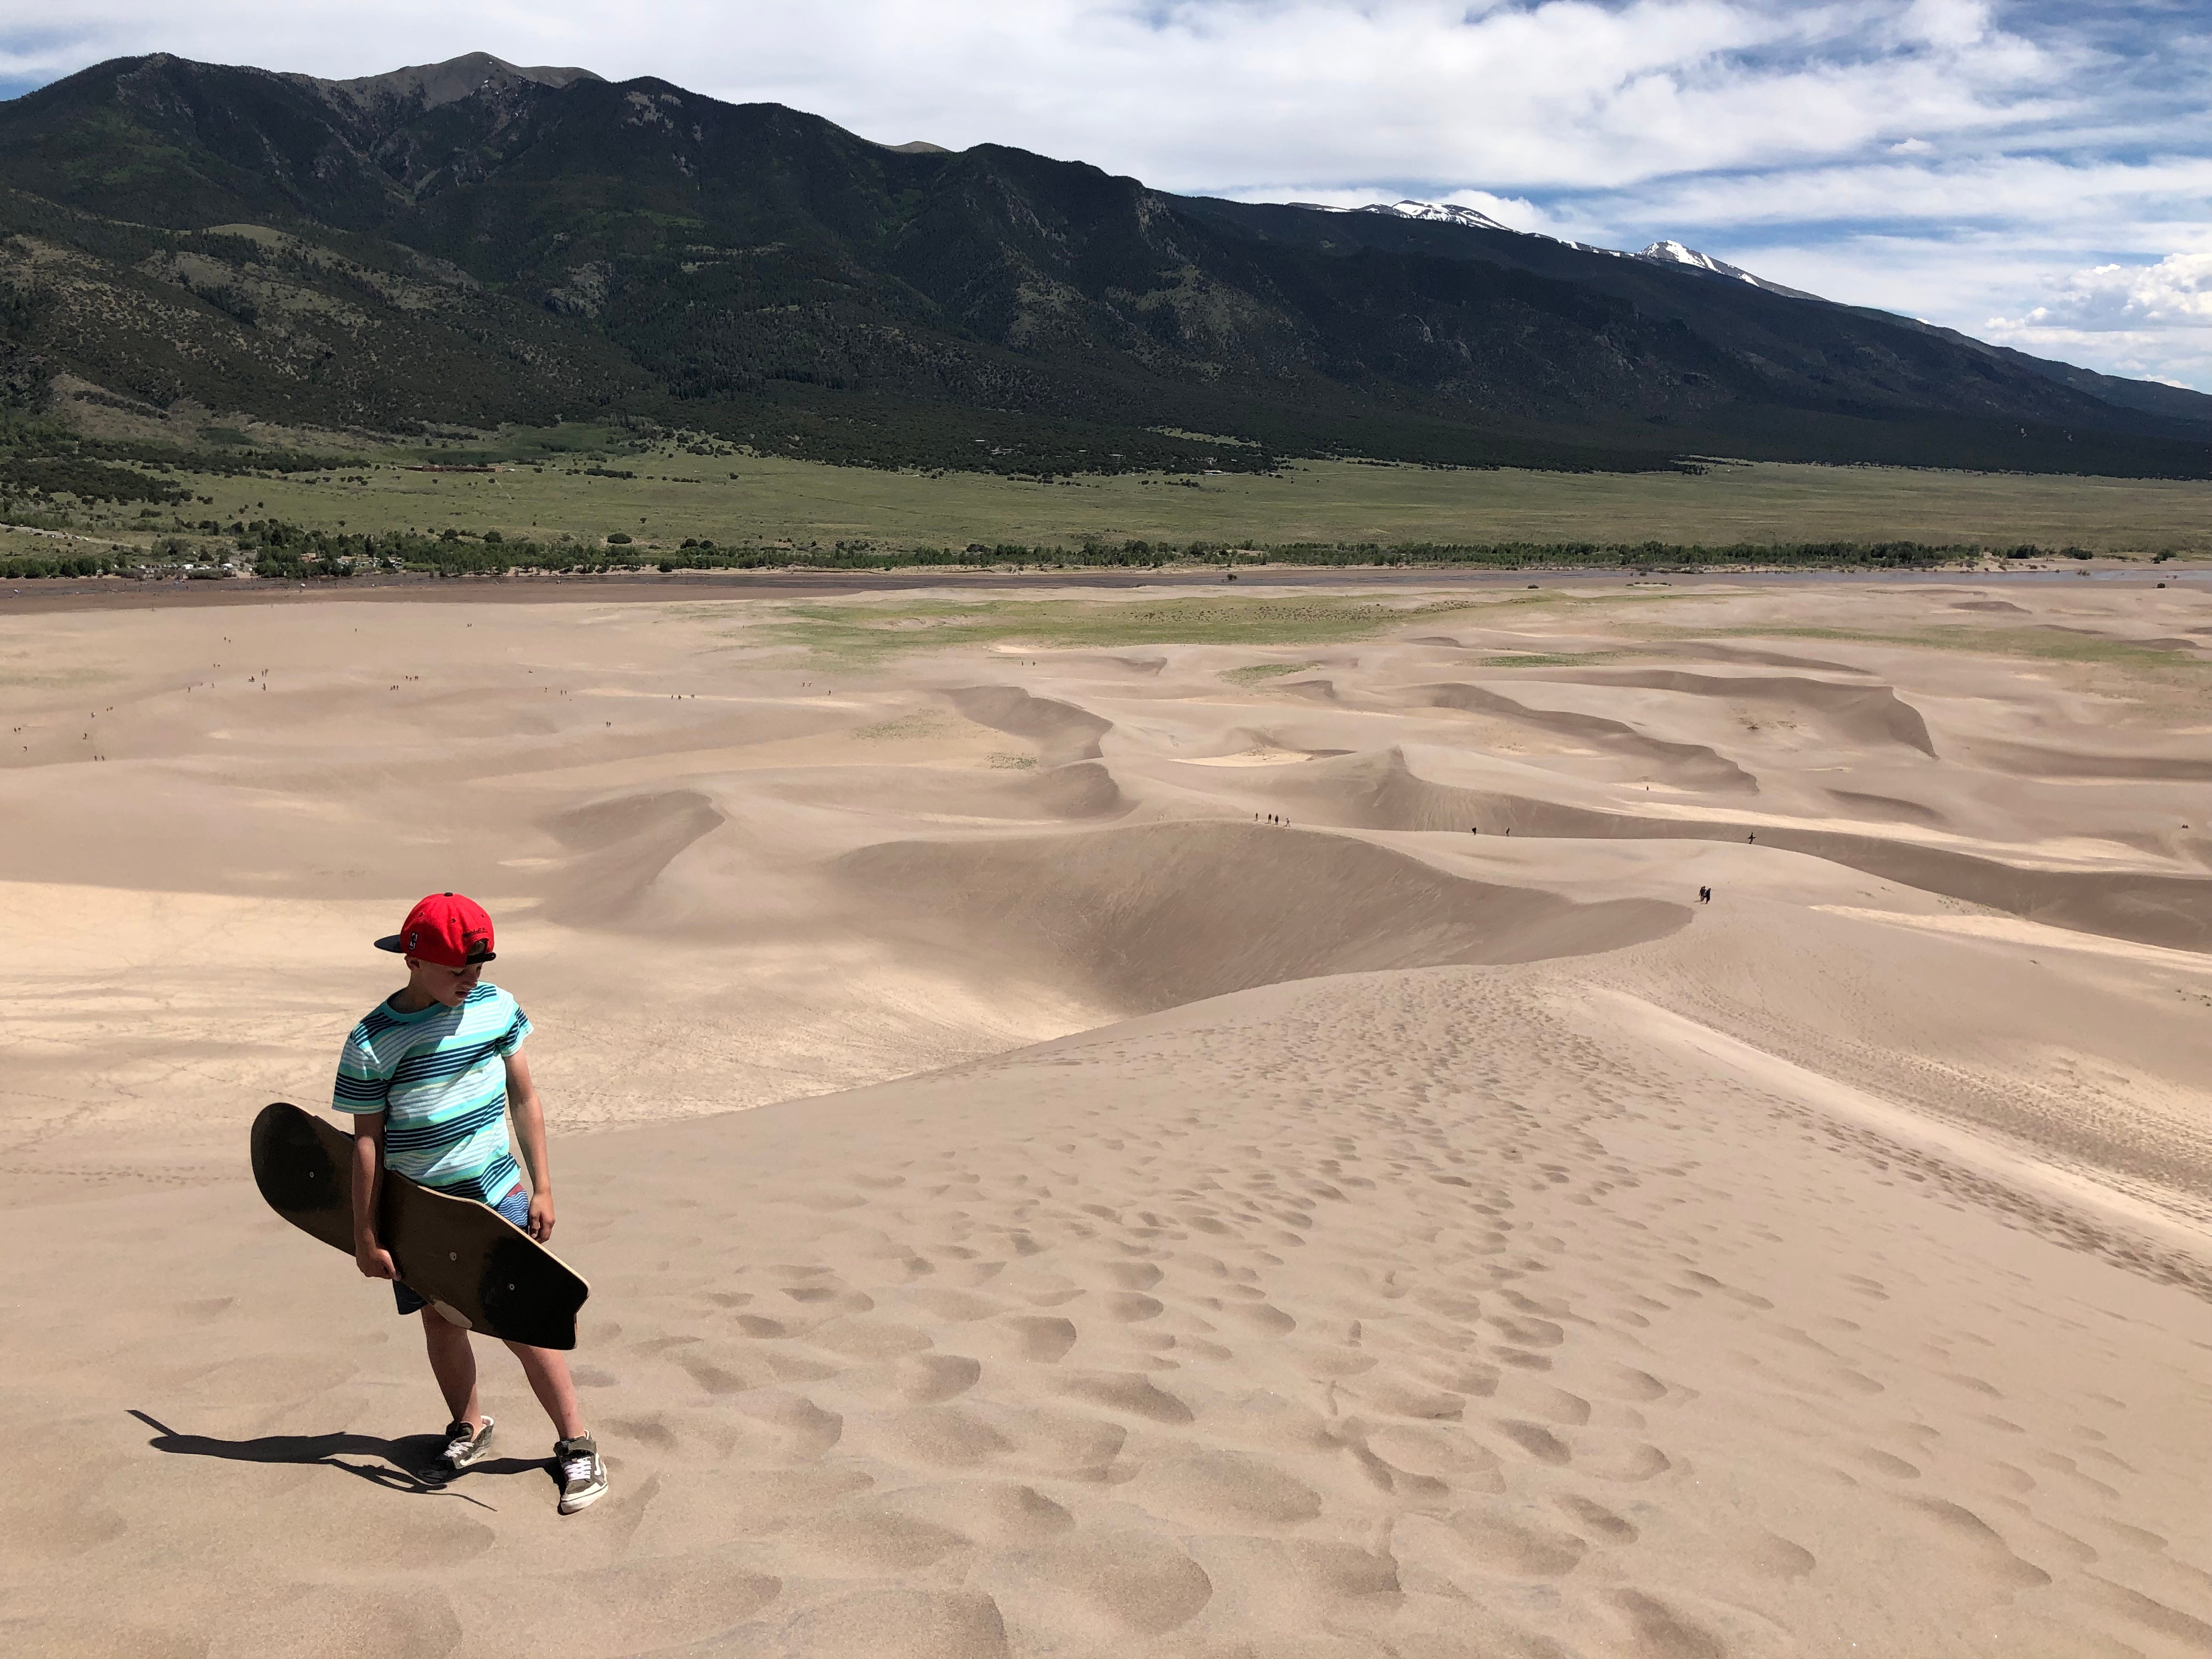 Sand boarding at Great Sand Dunes NP